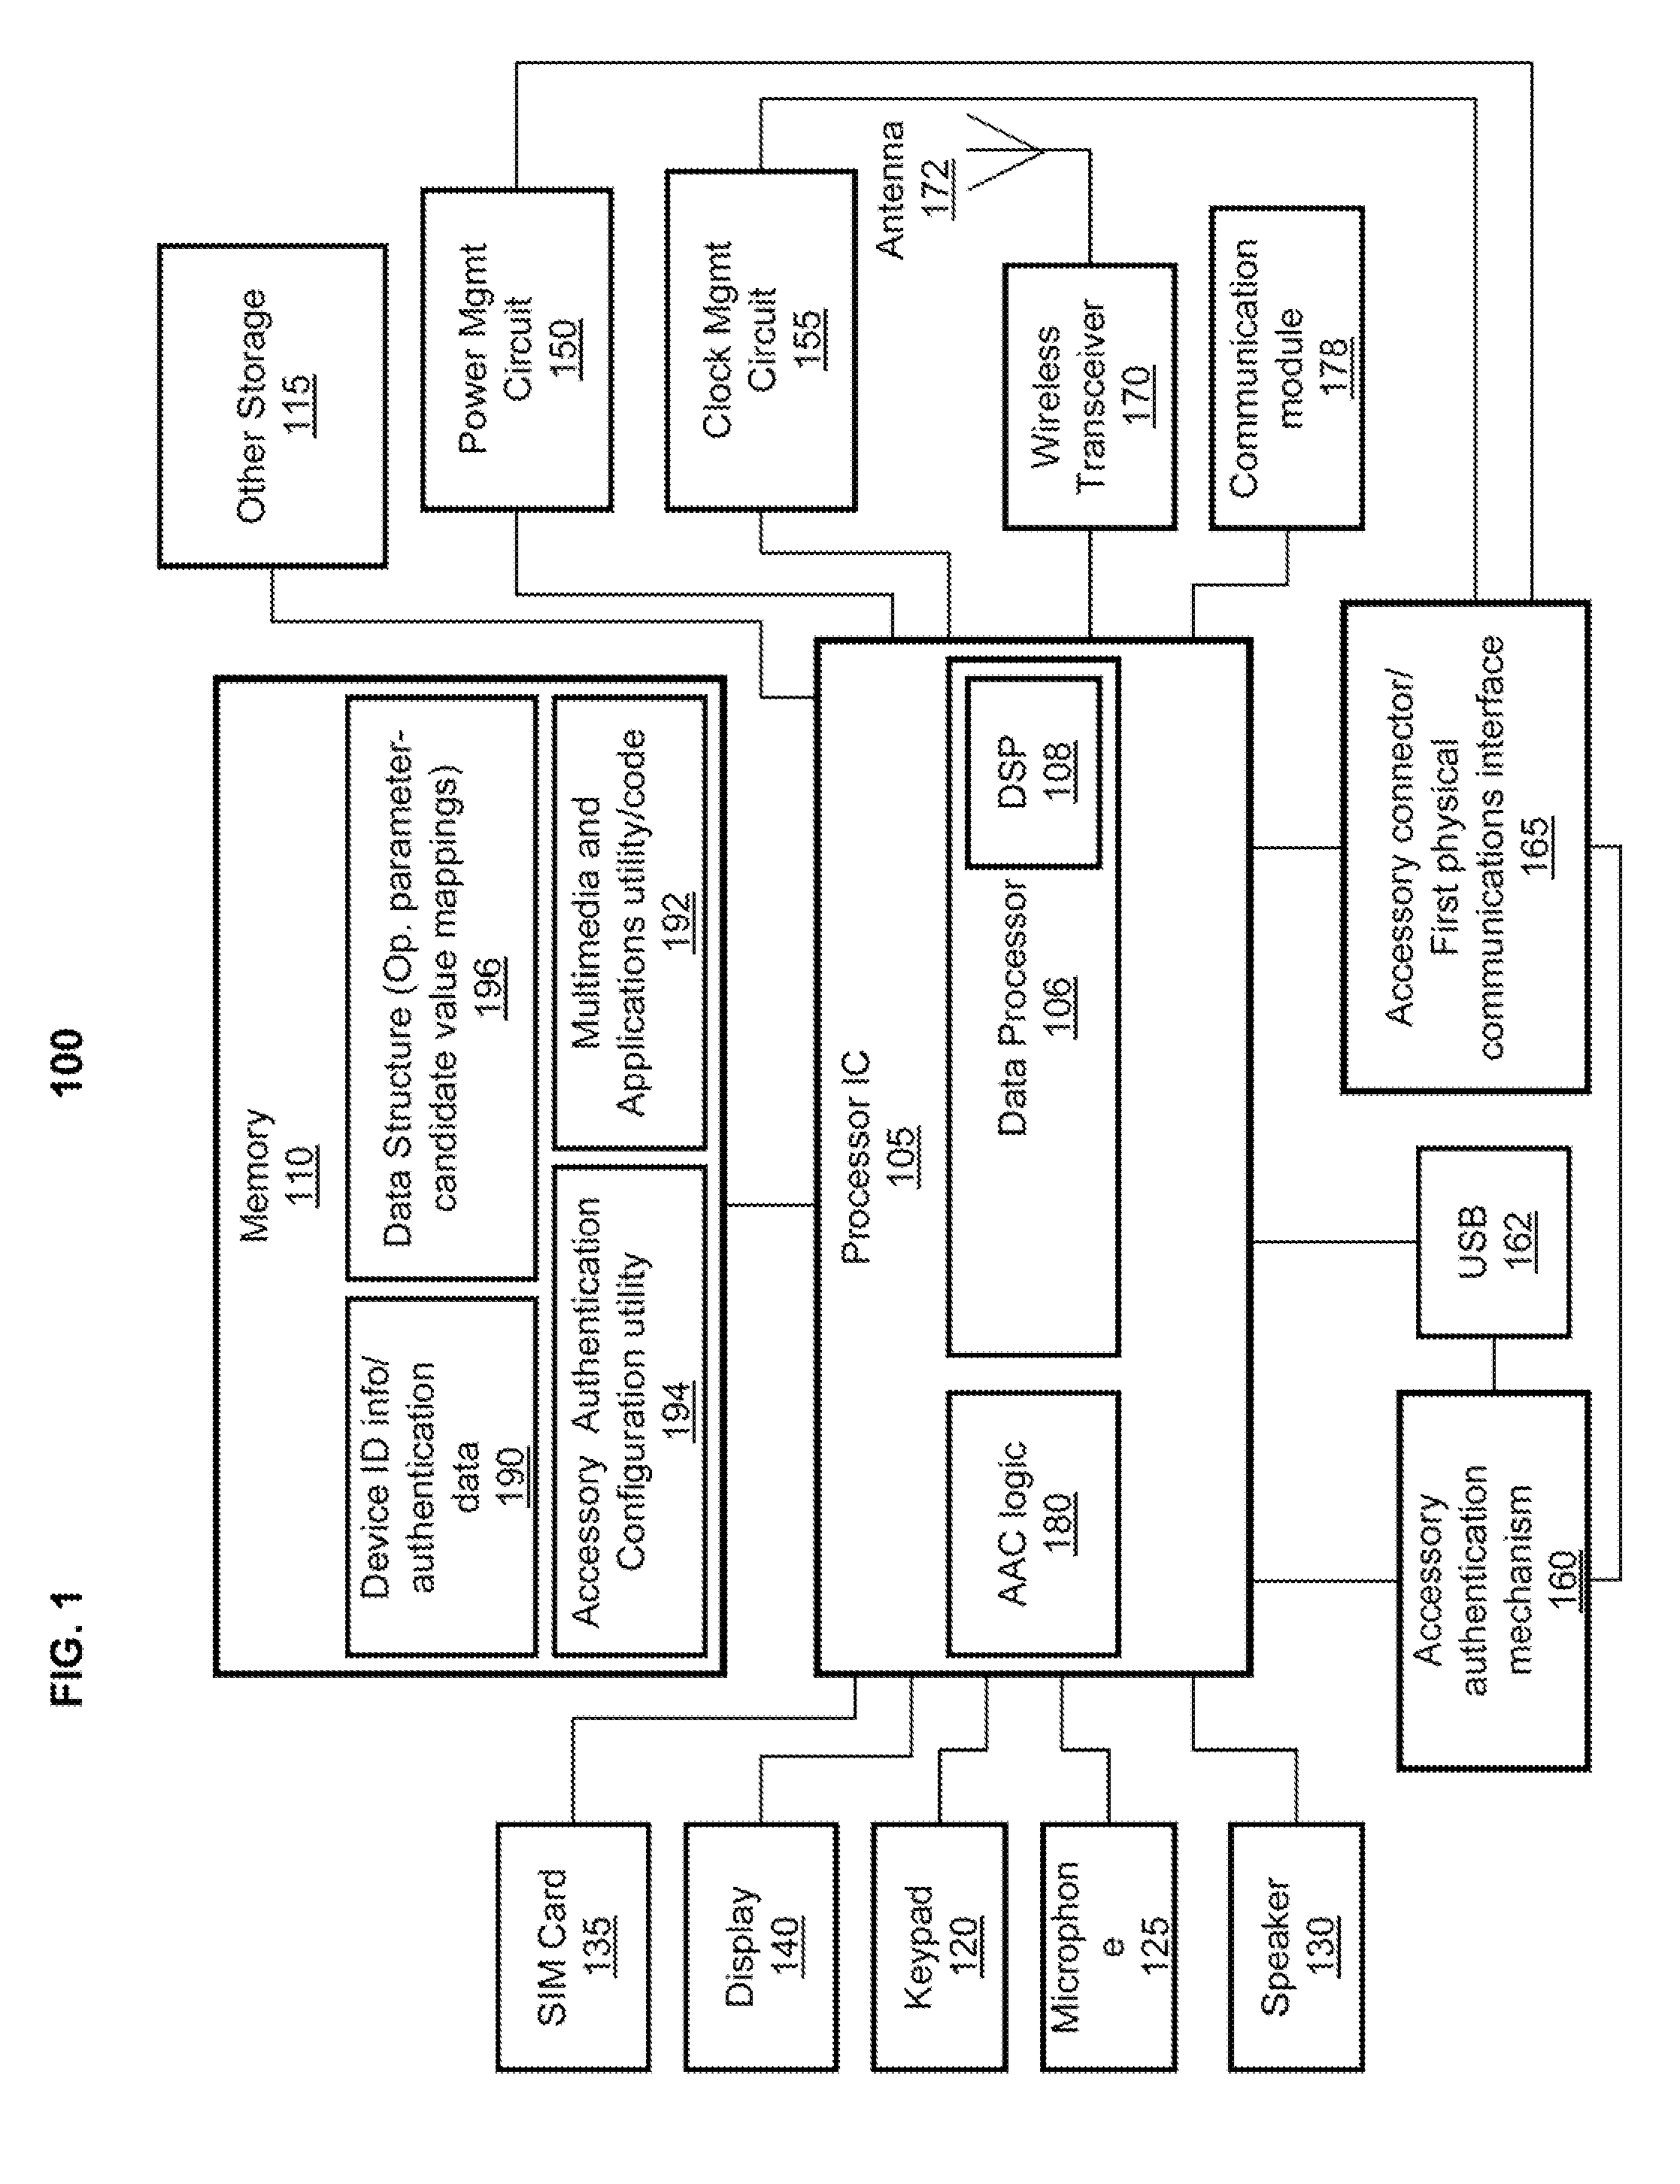 Method and apparatus to prevent receiver desensitization from radiated HDMI signals in accessor or computing devices